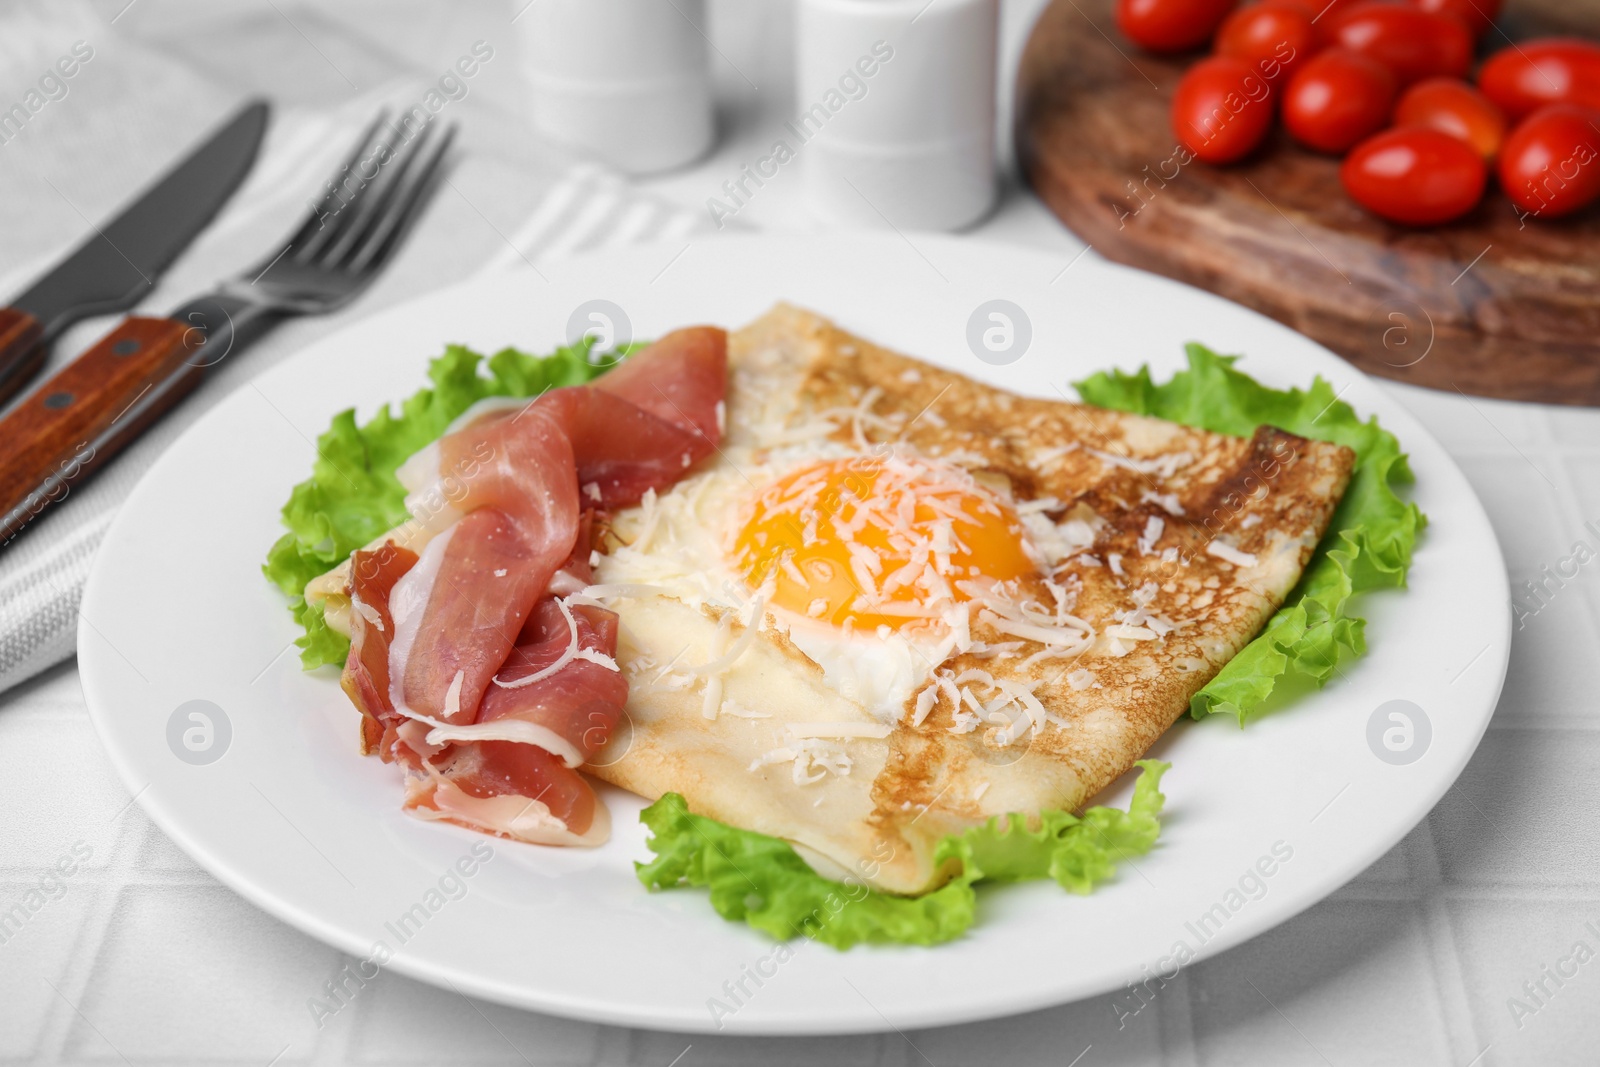 Photo of Delicious crepe with egg served on white tiled table. Breton galette